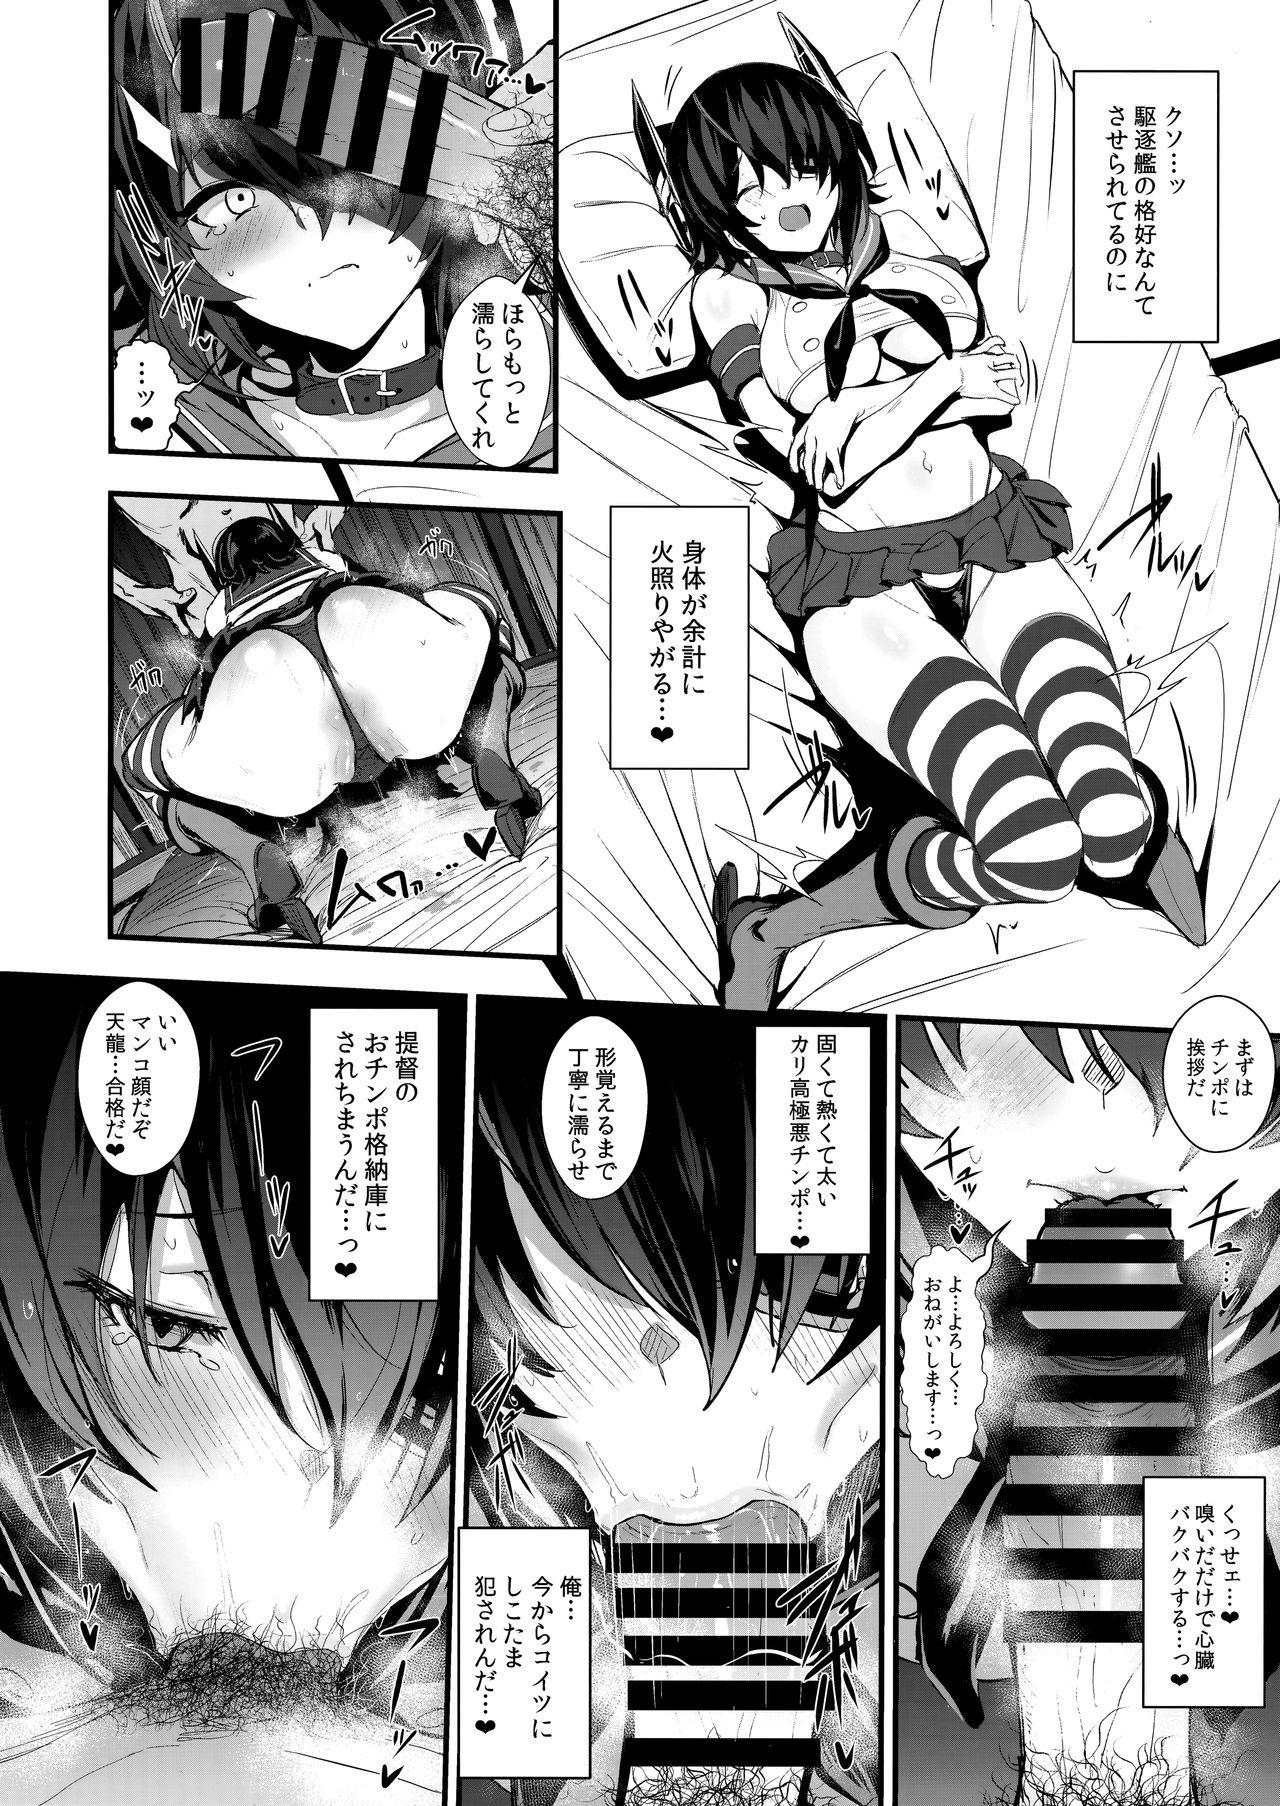 Gag FetiColle Vol. 07 Kouhen - Kantai collection 18 Year Old - Page 5